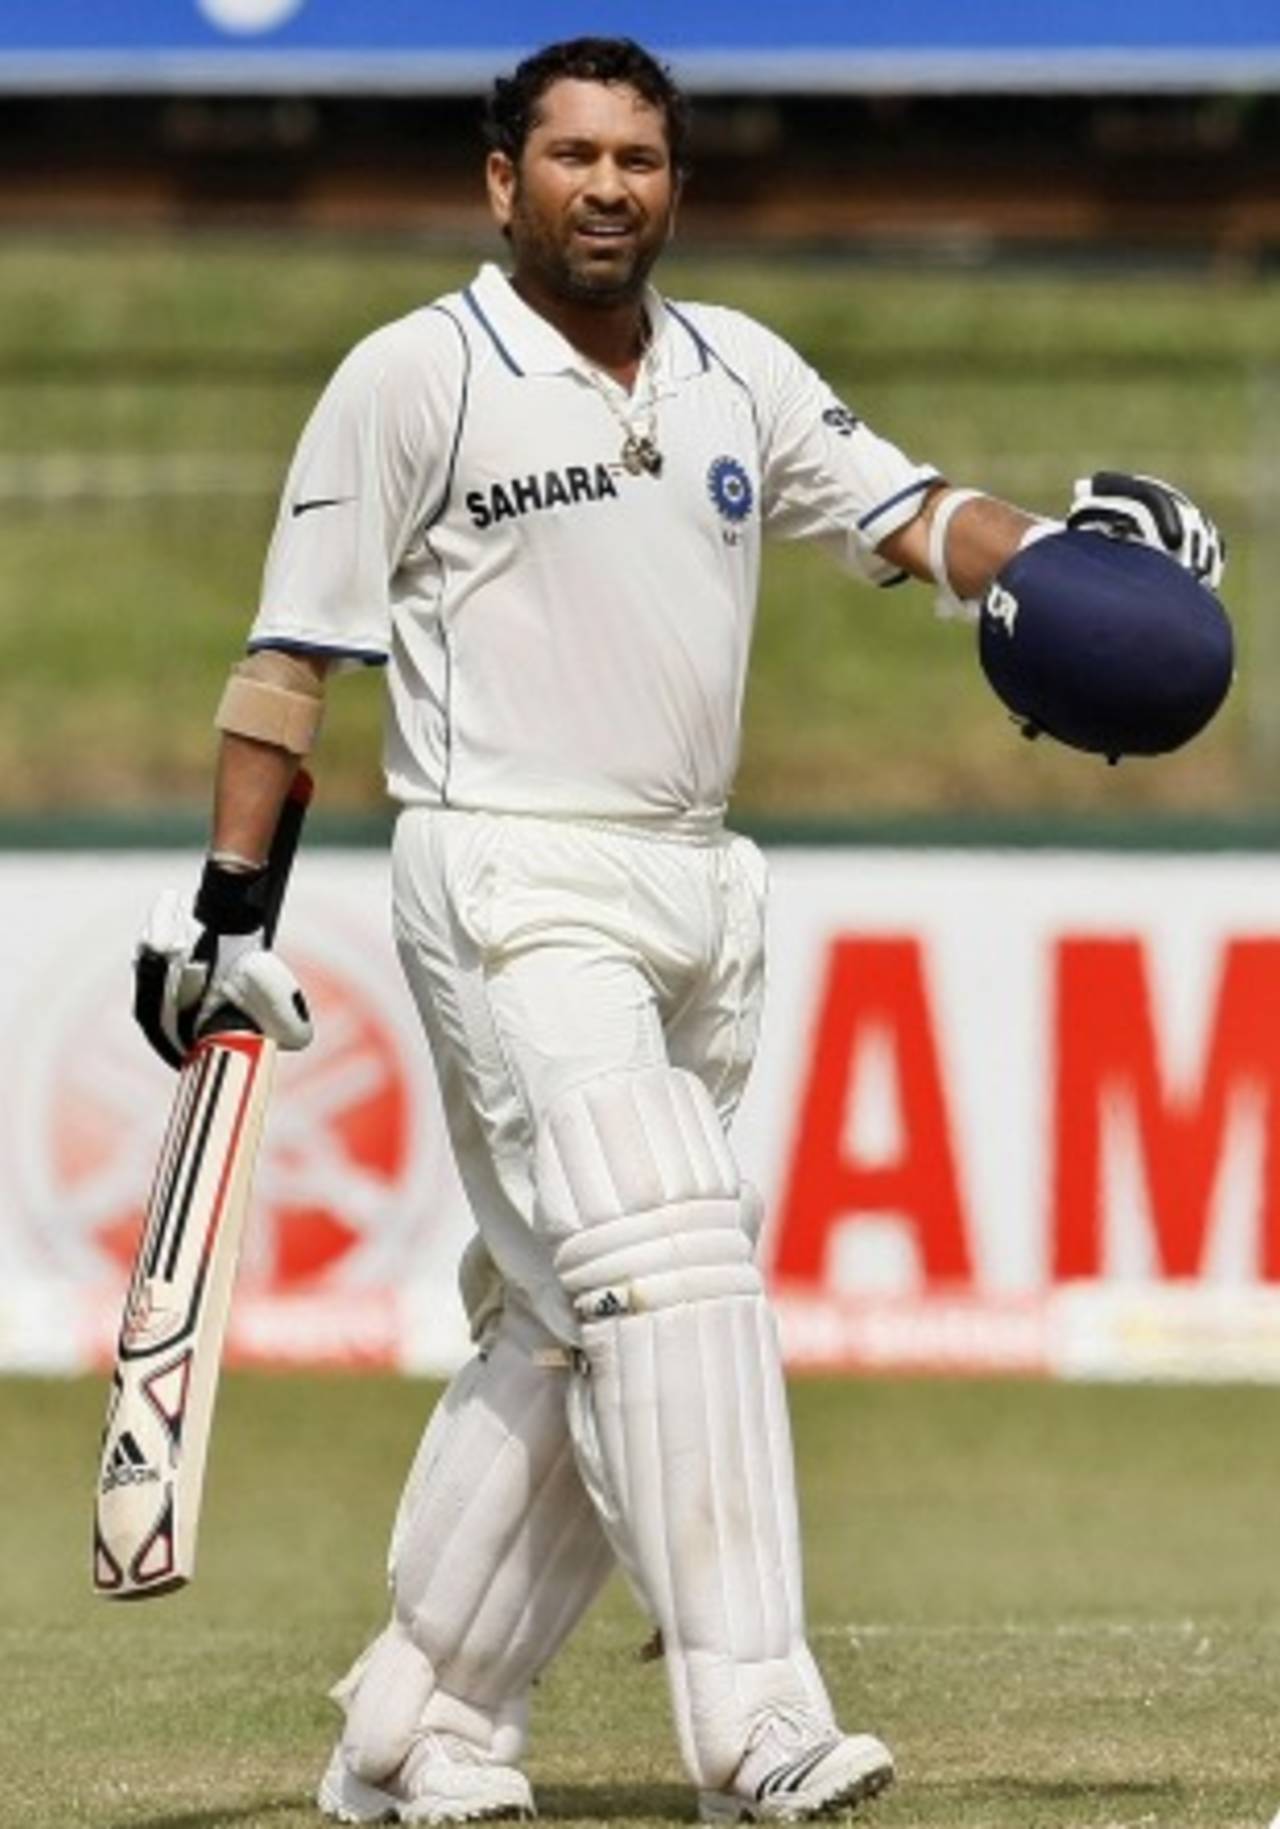 Sachin Tendulkar takes the applause after reaching his double-ton, Sri Lanka v India, 2nd Test, SSC, 4th day, July 29, 2010